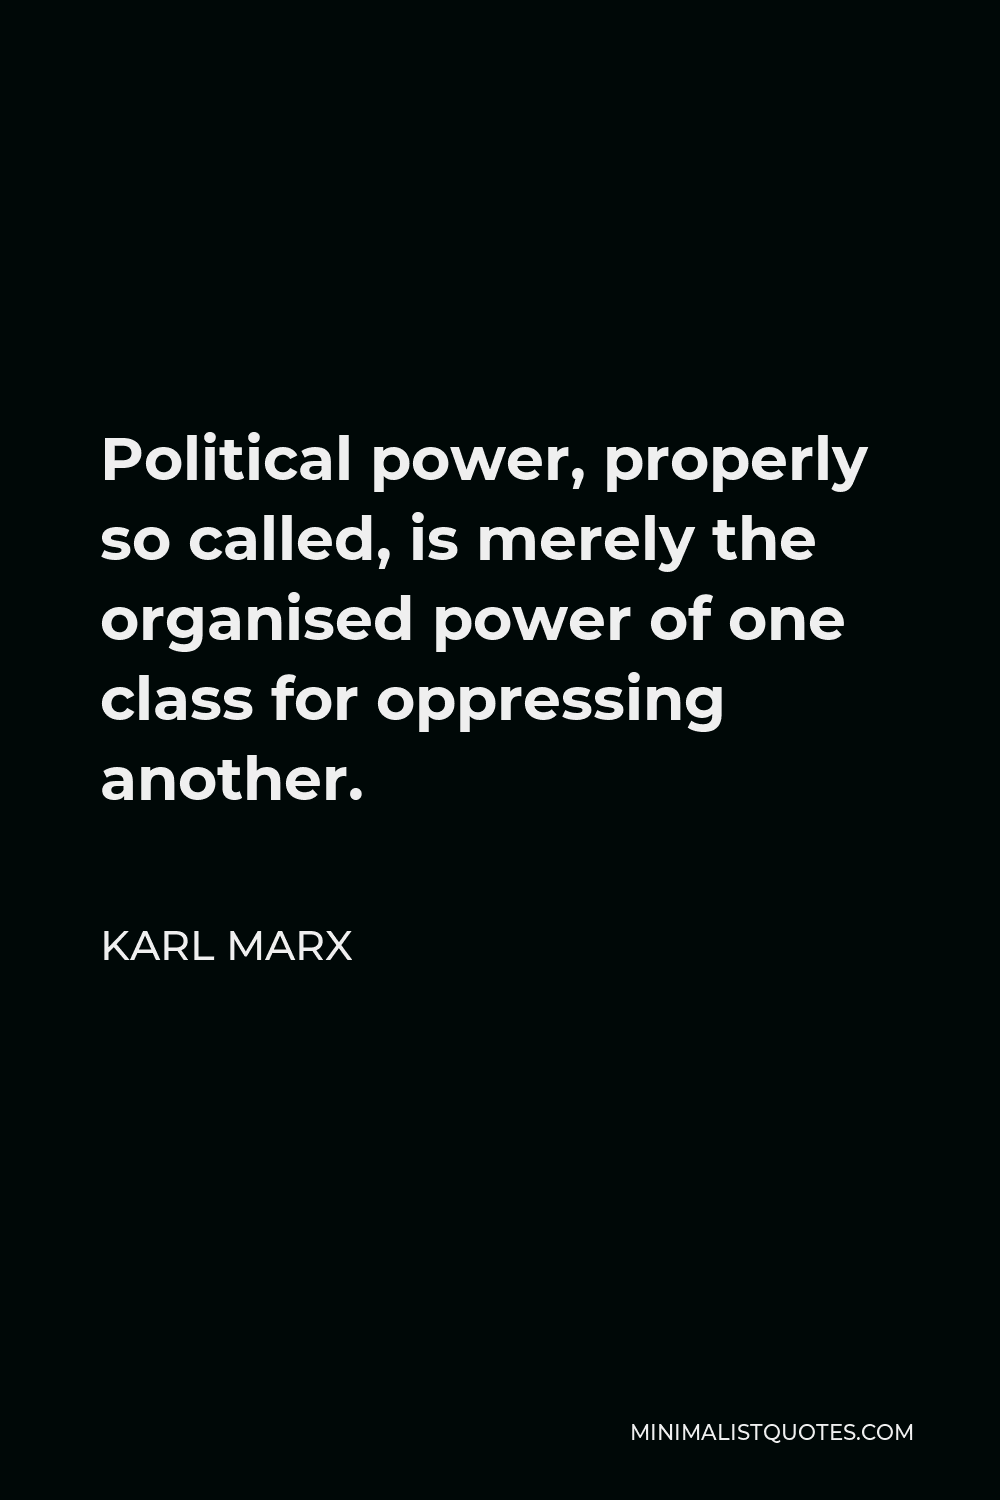 Karl Marx Quote - Political power, properly so called, is merely the organised power of one class for oppressing another.